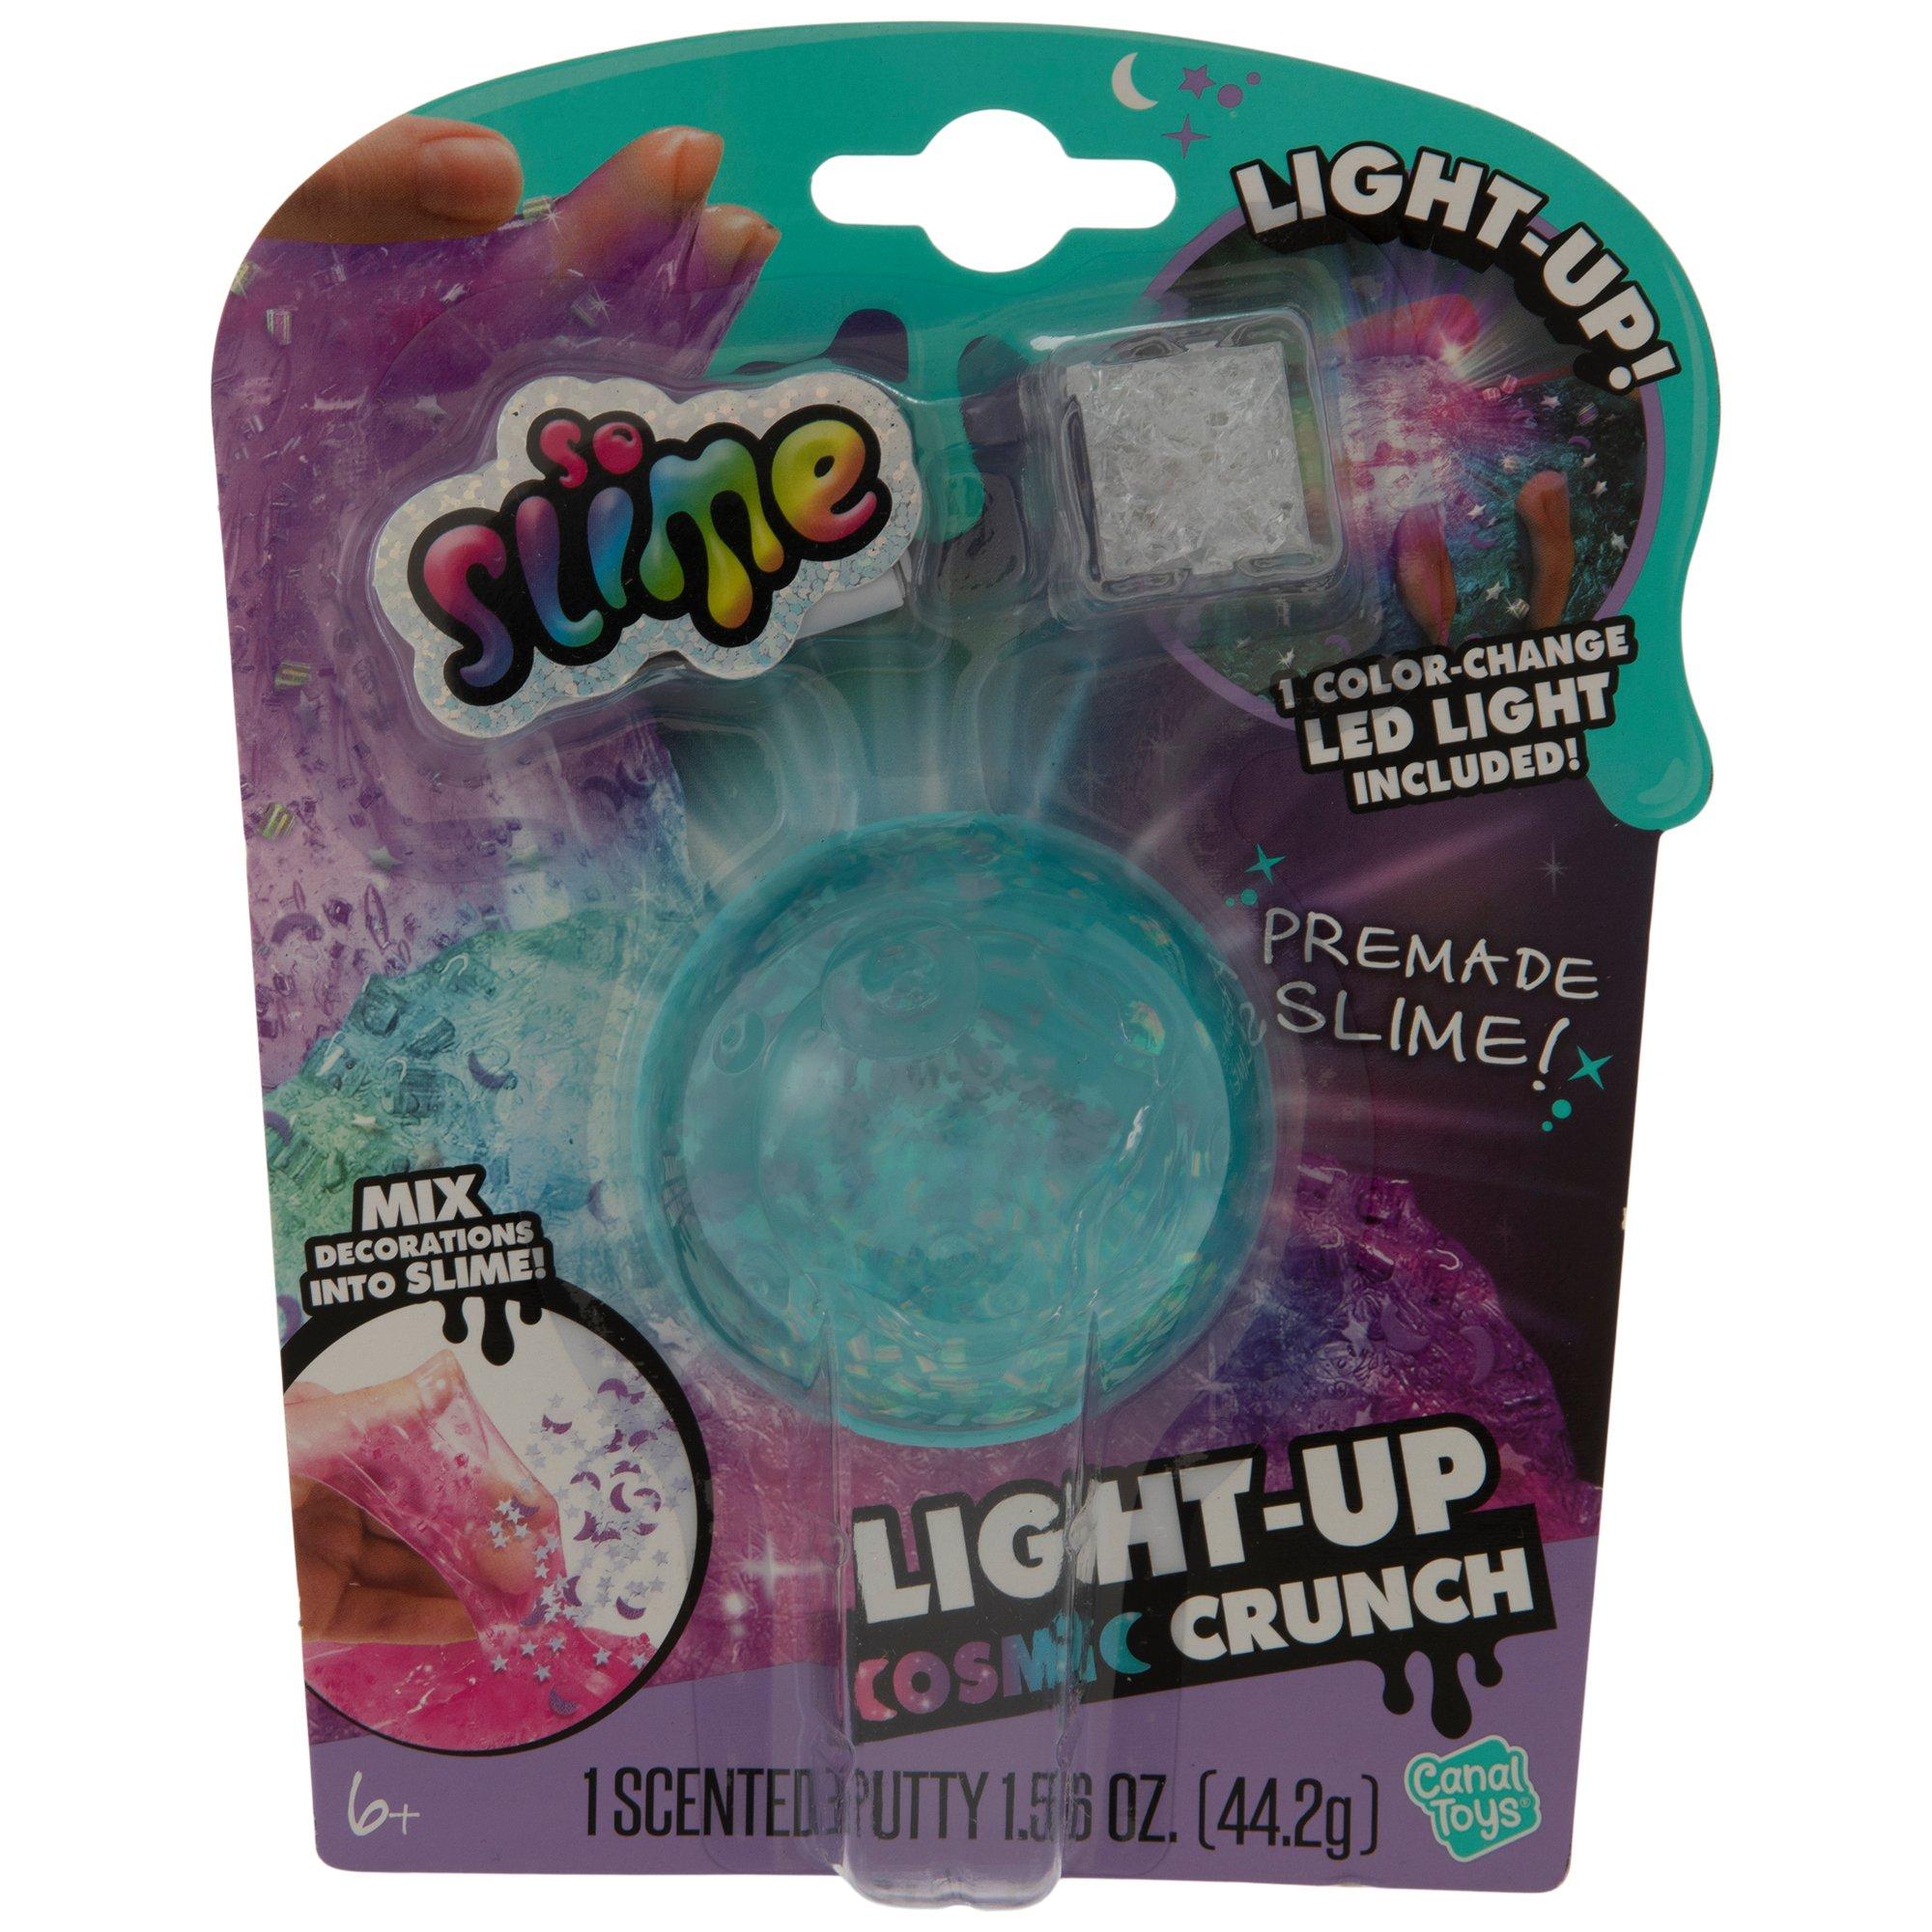 So Slime DIY Sensory Slime Factory with Light-up Cosmic Crunch